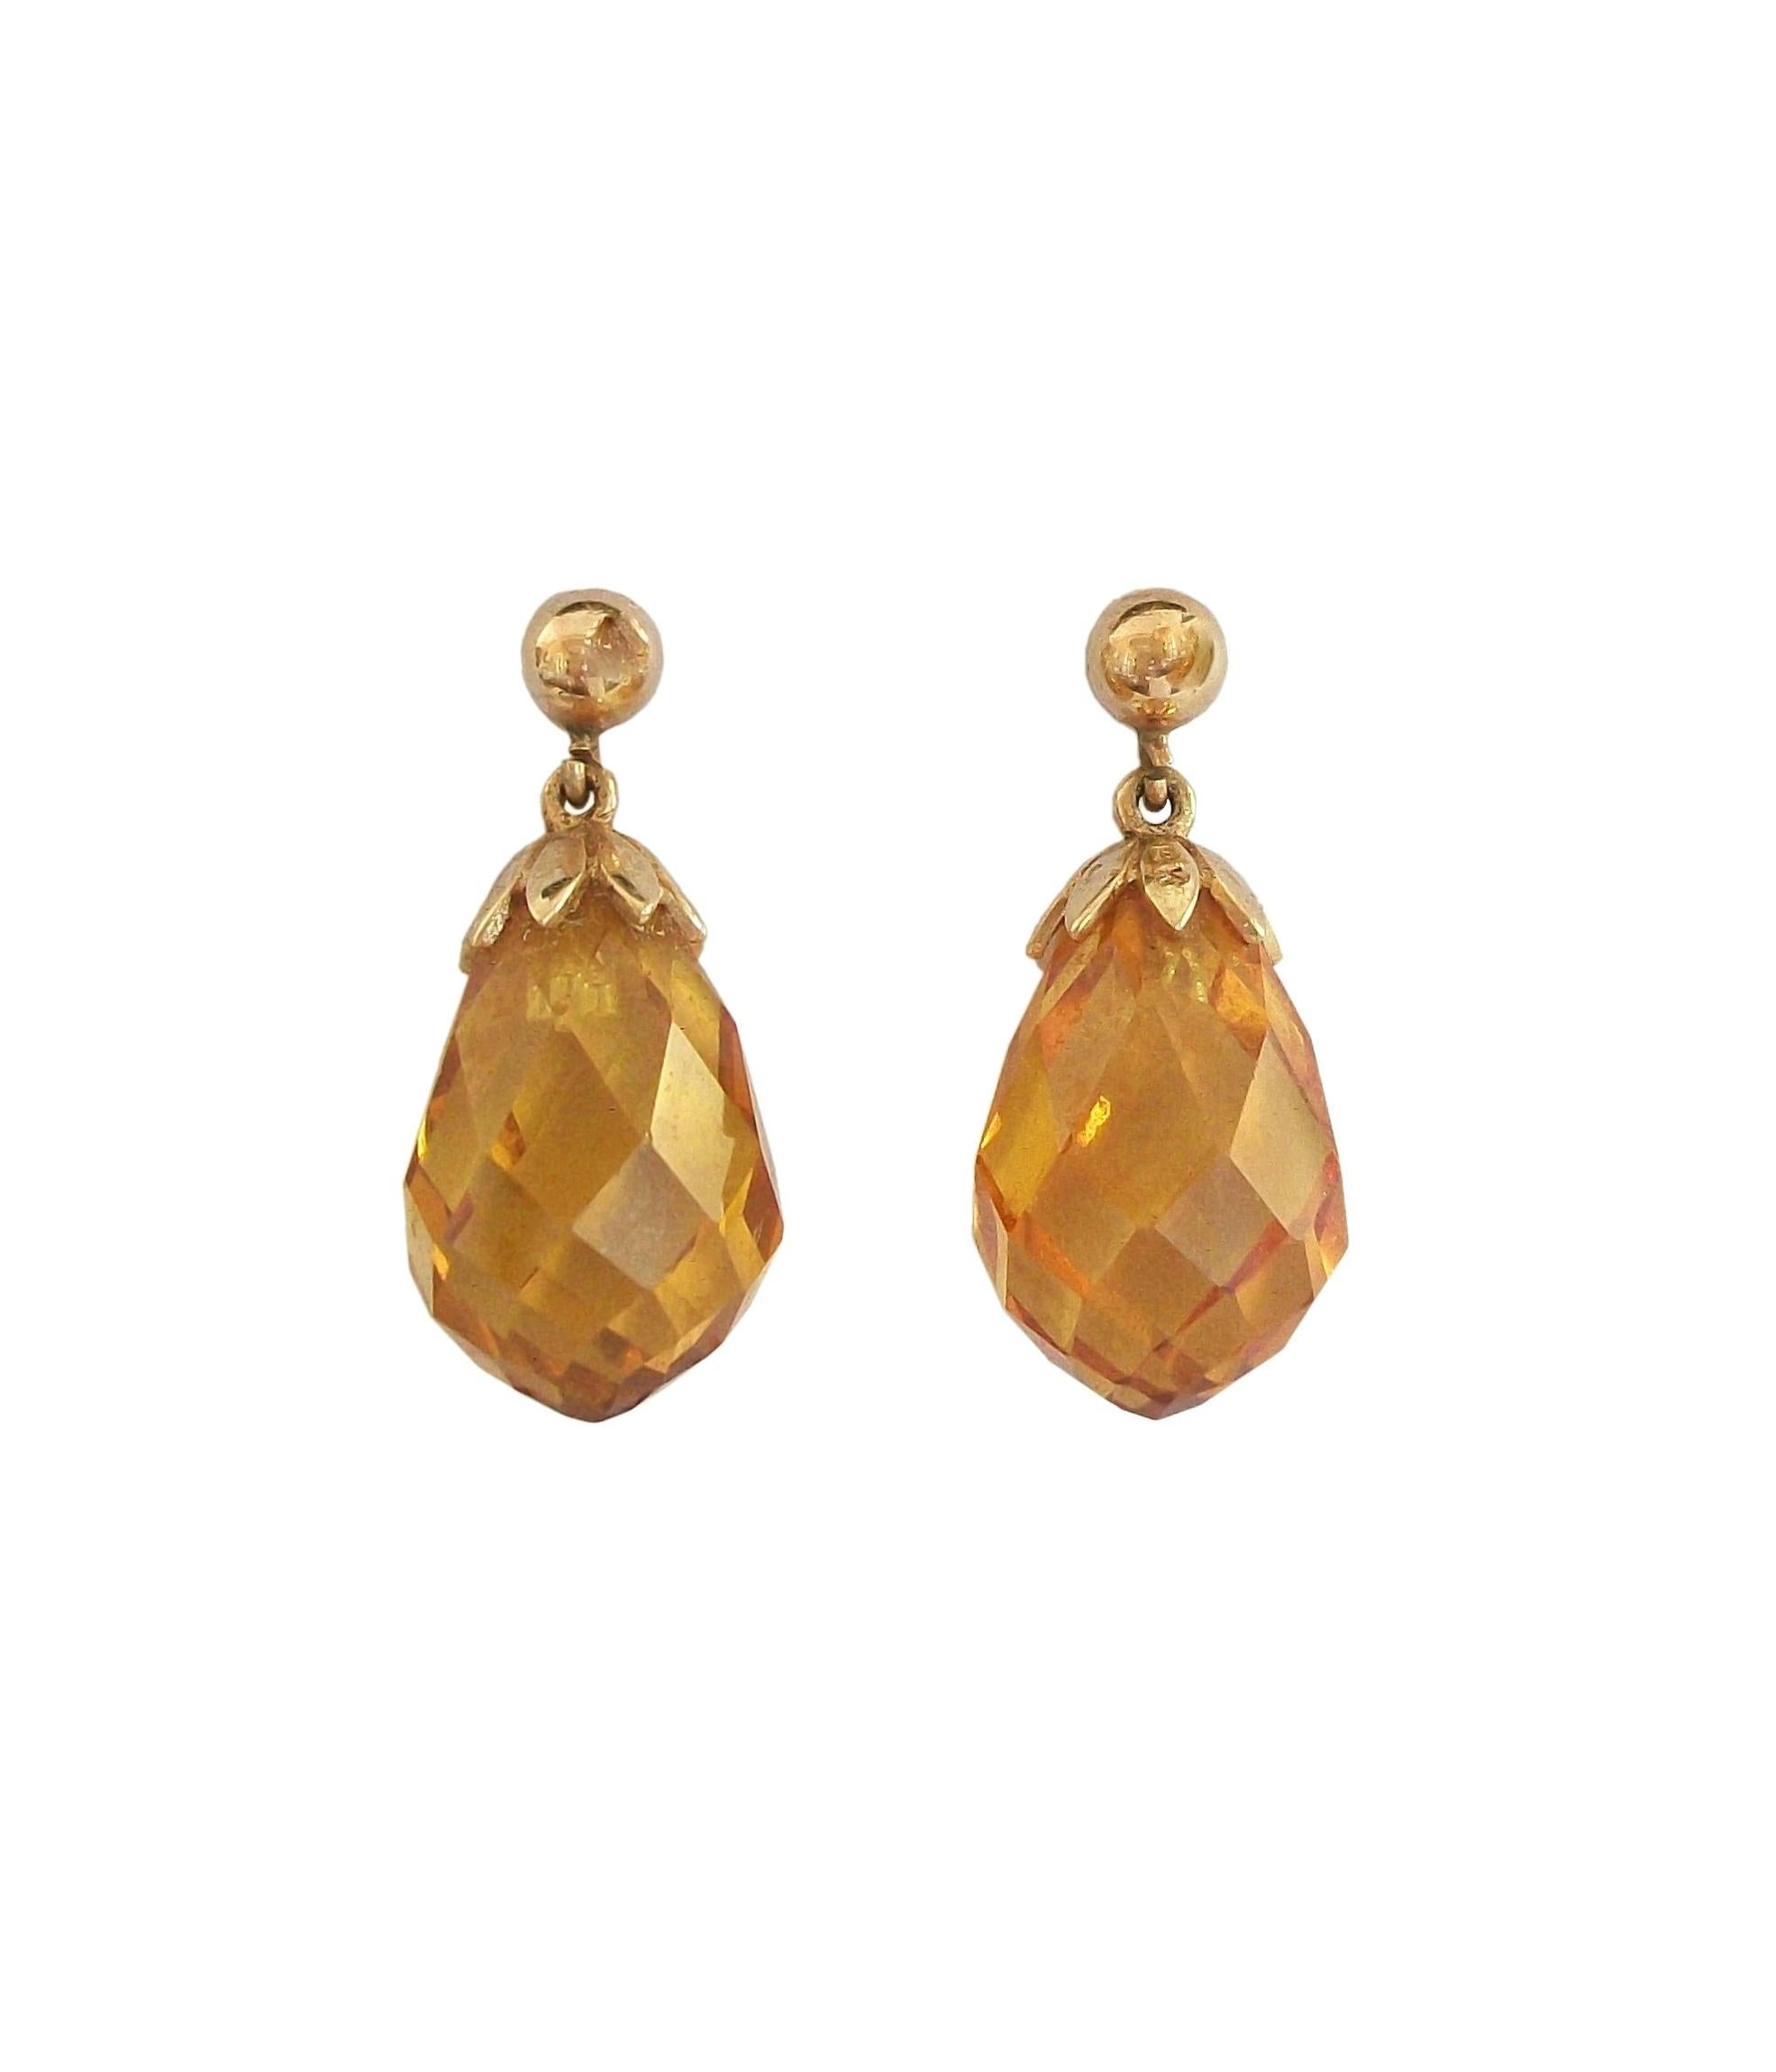 Vintage estate Madeira Citrine Briolette and 14K yellow gold stud / drop earrings - hand made - each earring drop set with one Citrine (orange / yellow in color - well matched pair - each approximately 8.68 carats - 15 x 9 x 9 mm. each) - gold